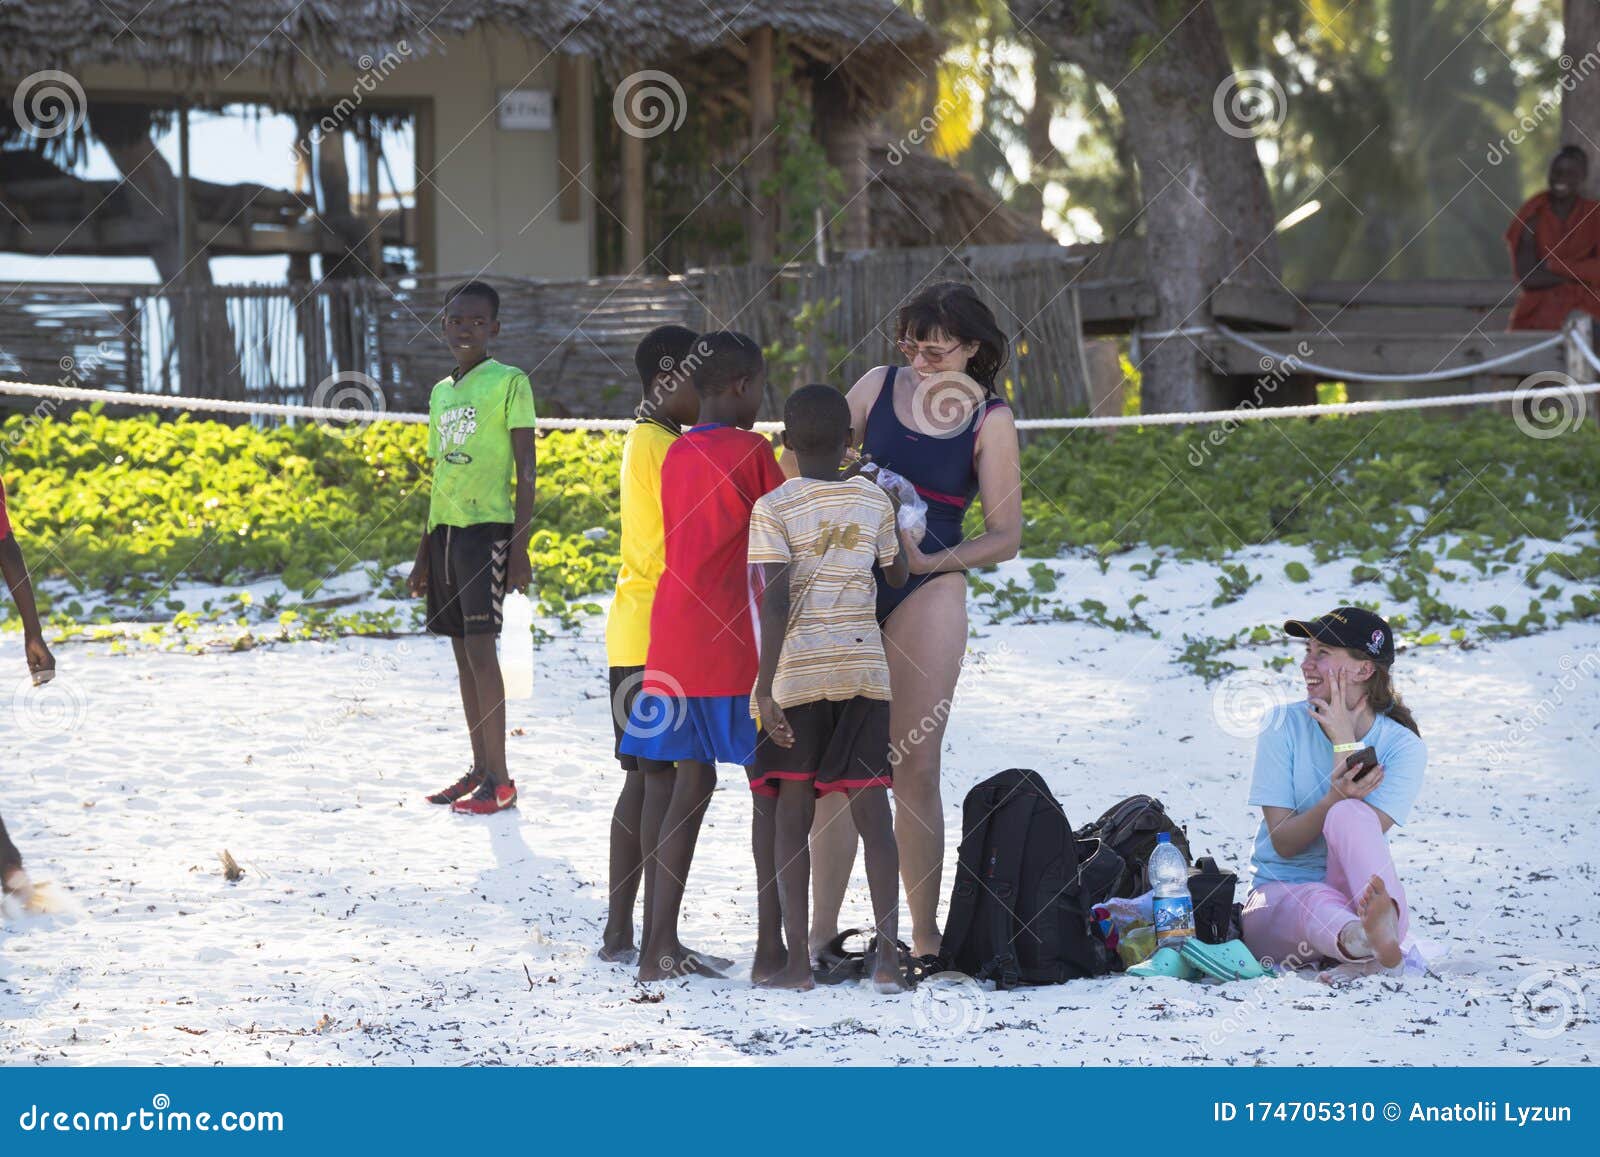 European Women Tourists among African Children Editorial Image picture